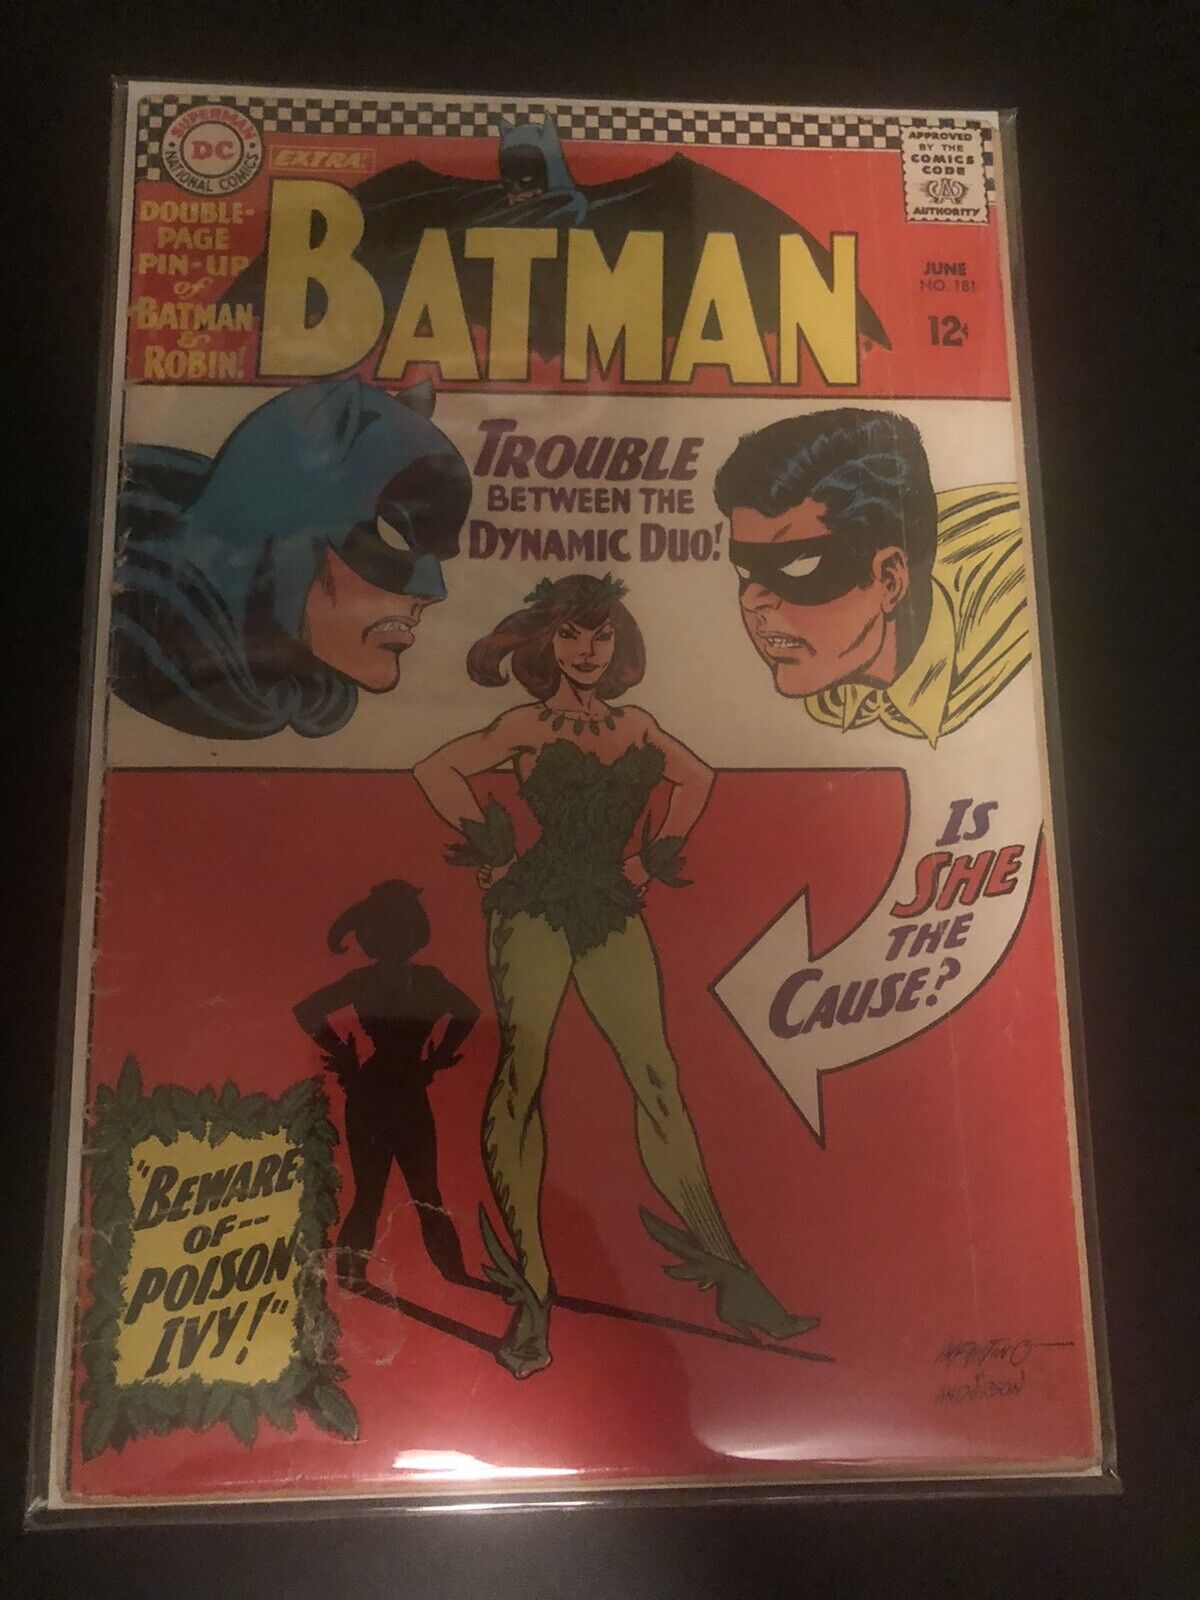 Batman #181 Vol 1 Low Grade Readers Copy 1st App Poison Ivy Complete with Pin-Up